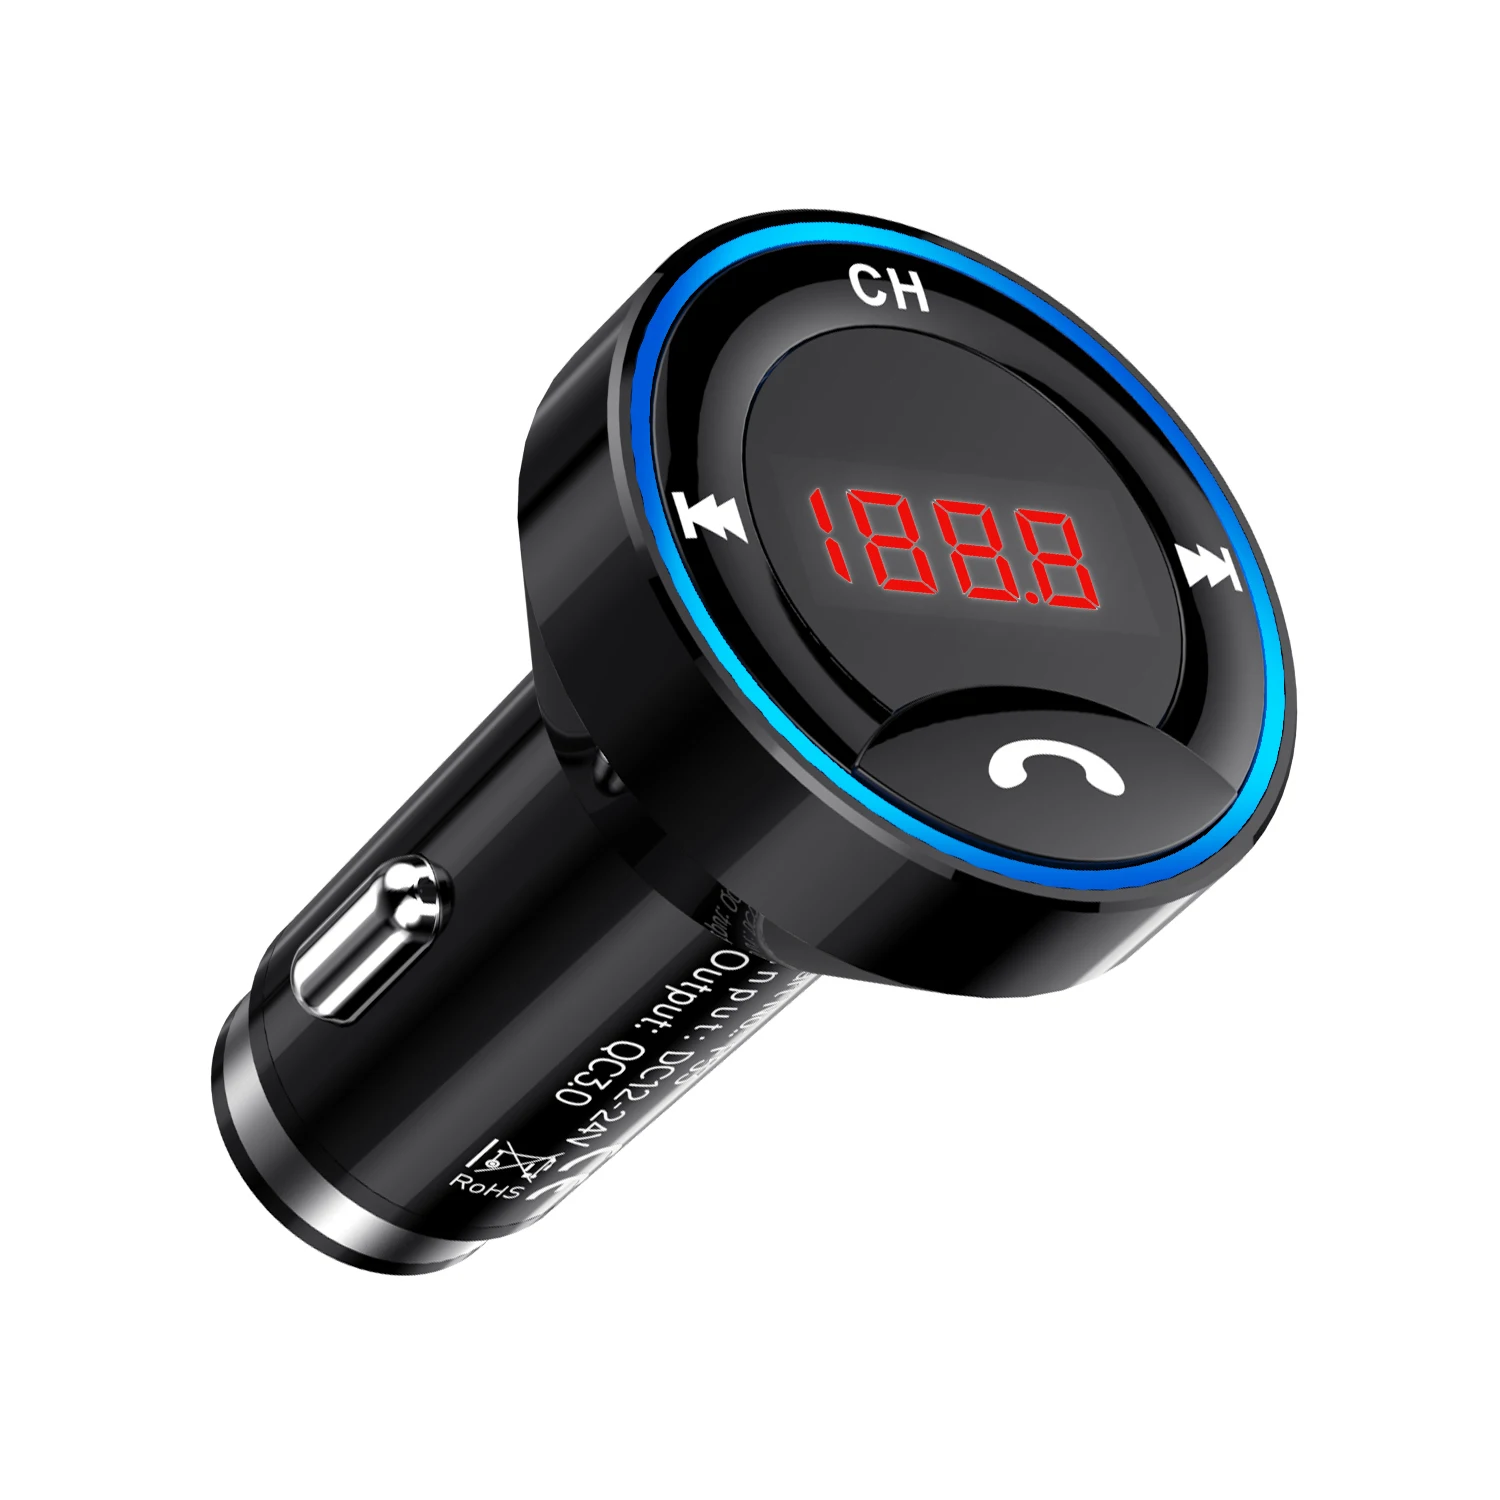 High Quality MP3 Kit Car Wireless Player FM Radio Transmitter, Hands Free For Phone